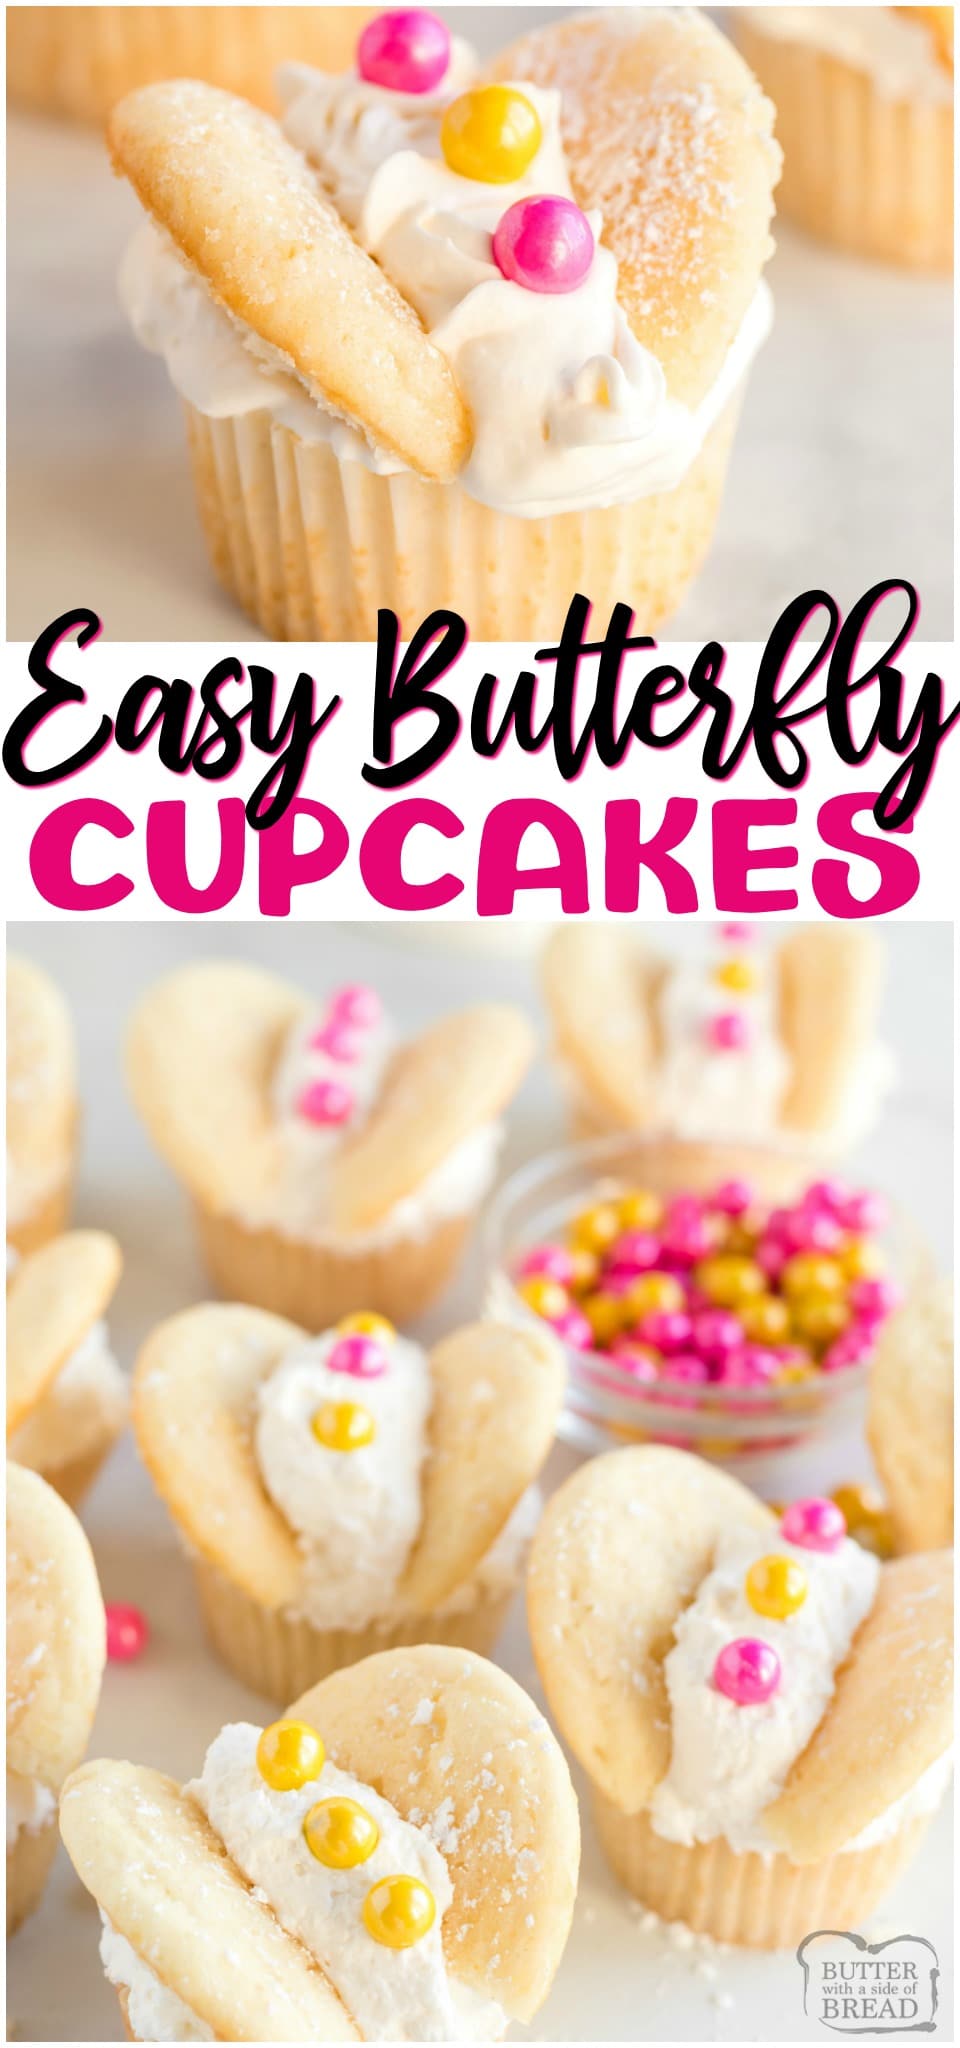 Vanilla Butterfly Cupcakes topped with whipped cream and colorful candies. Easily make these perfect spring butterfly cupcakes for any occasion!